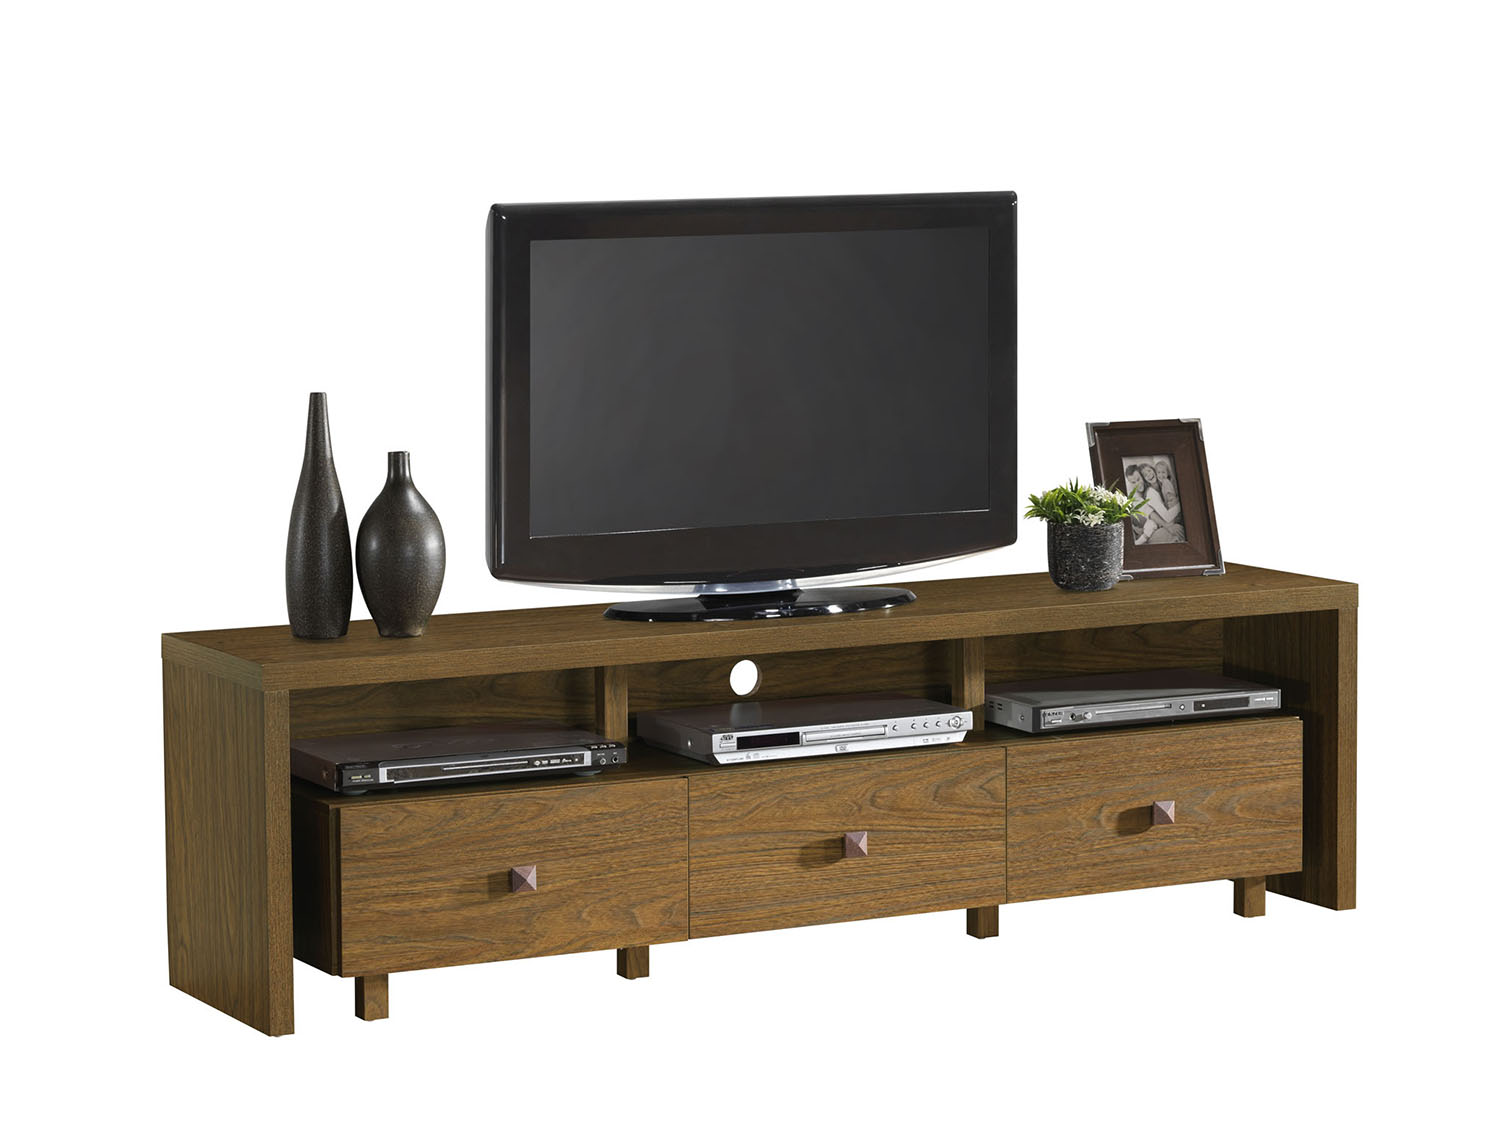 Techni Mobili Palma TV Cabinet for TVs up to 75", 3-Drawer Storage in Multiple Finishes - image 2 of 4